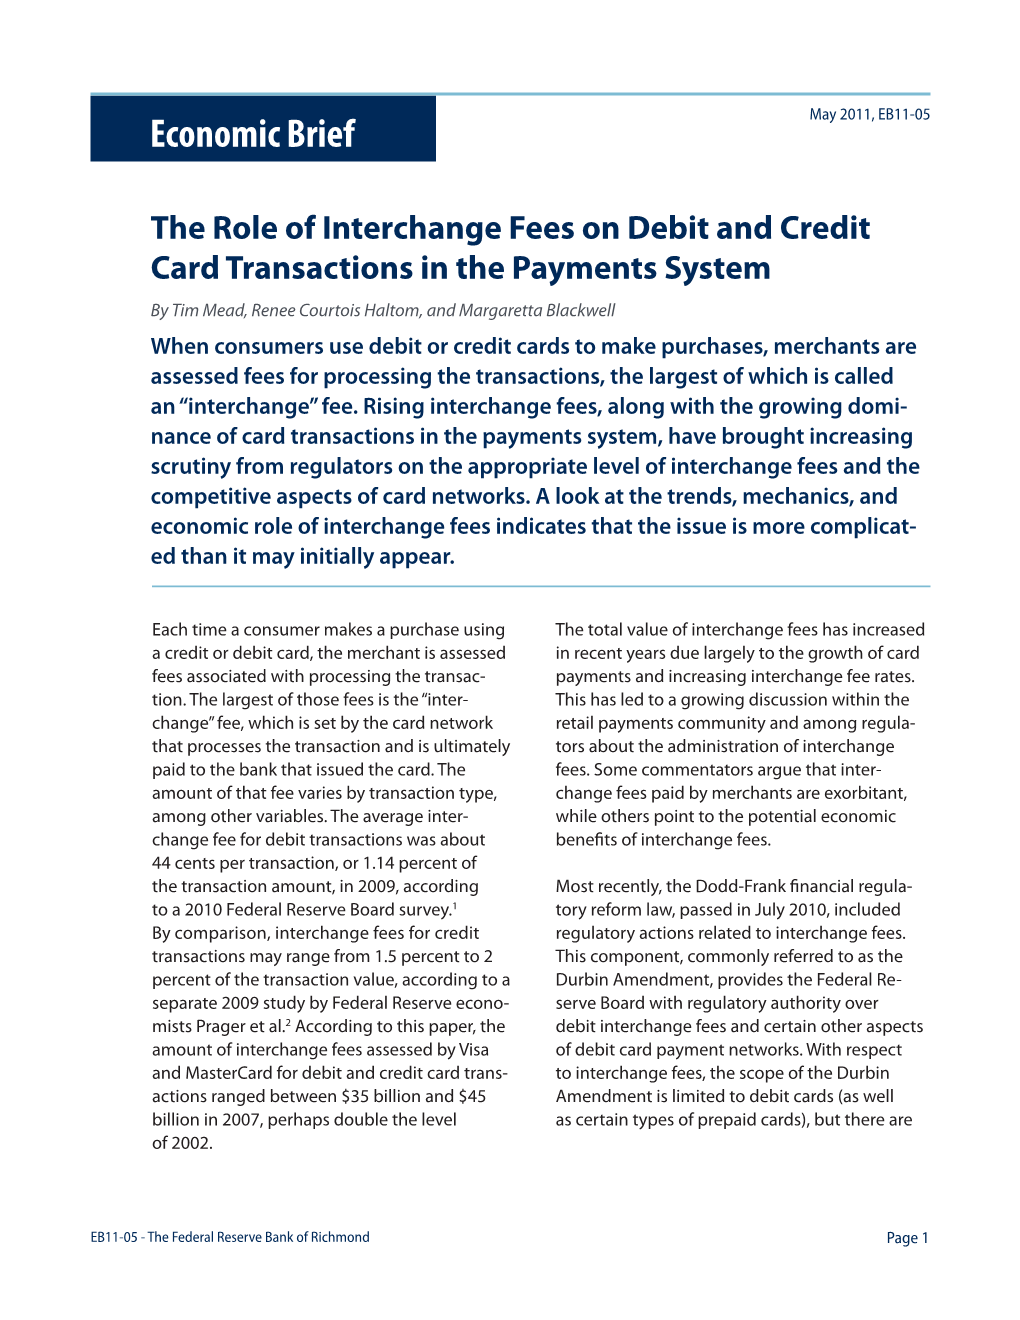 The Role of Interchange Fees on Debit and Credit Card Transactions